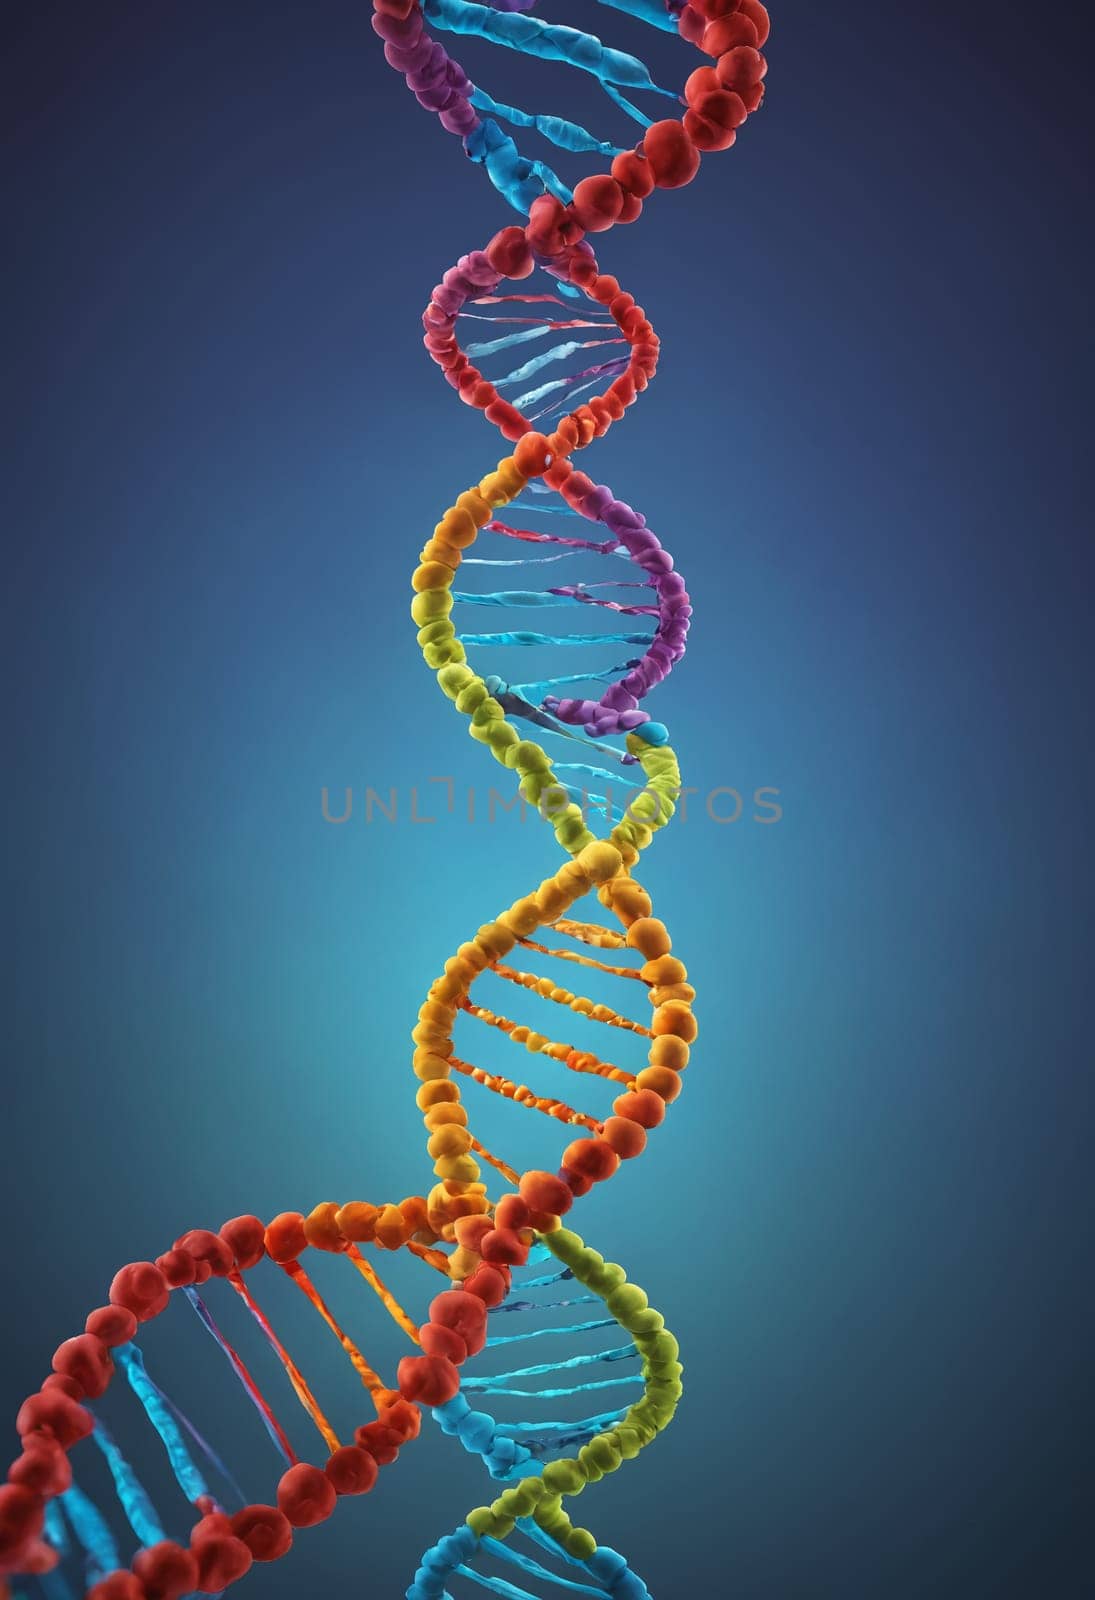 A 3D depiction of the DNA double helix, highlighting the sugar-phosphate backbone.